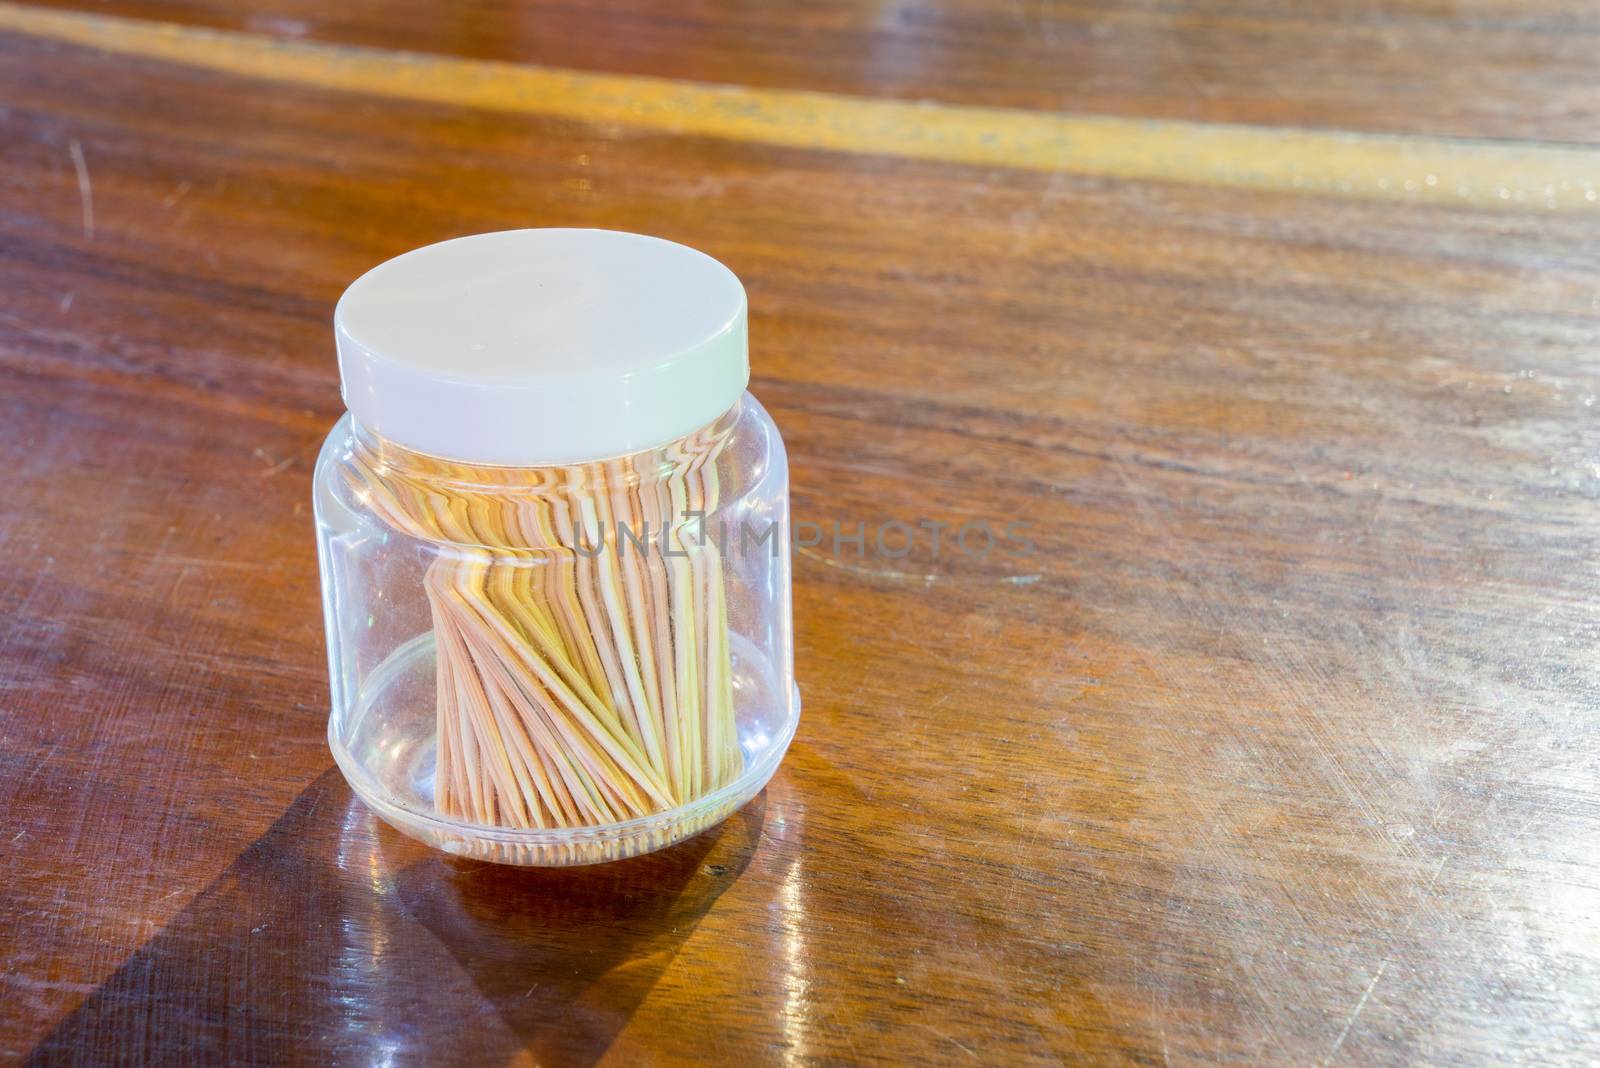 Toothpick in a bottle on table by iamway